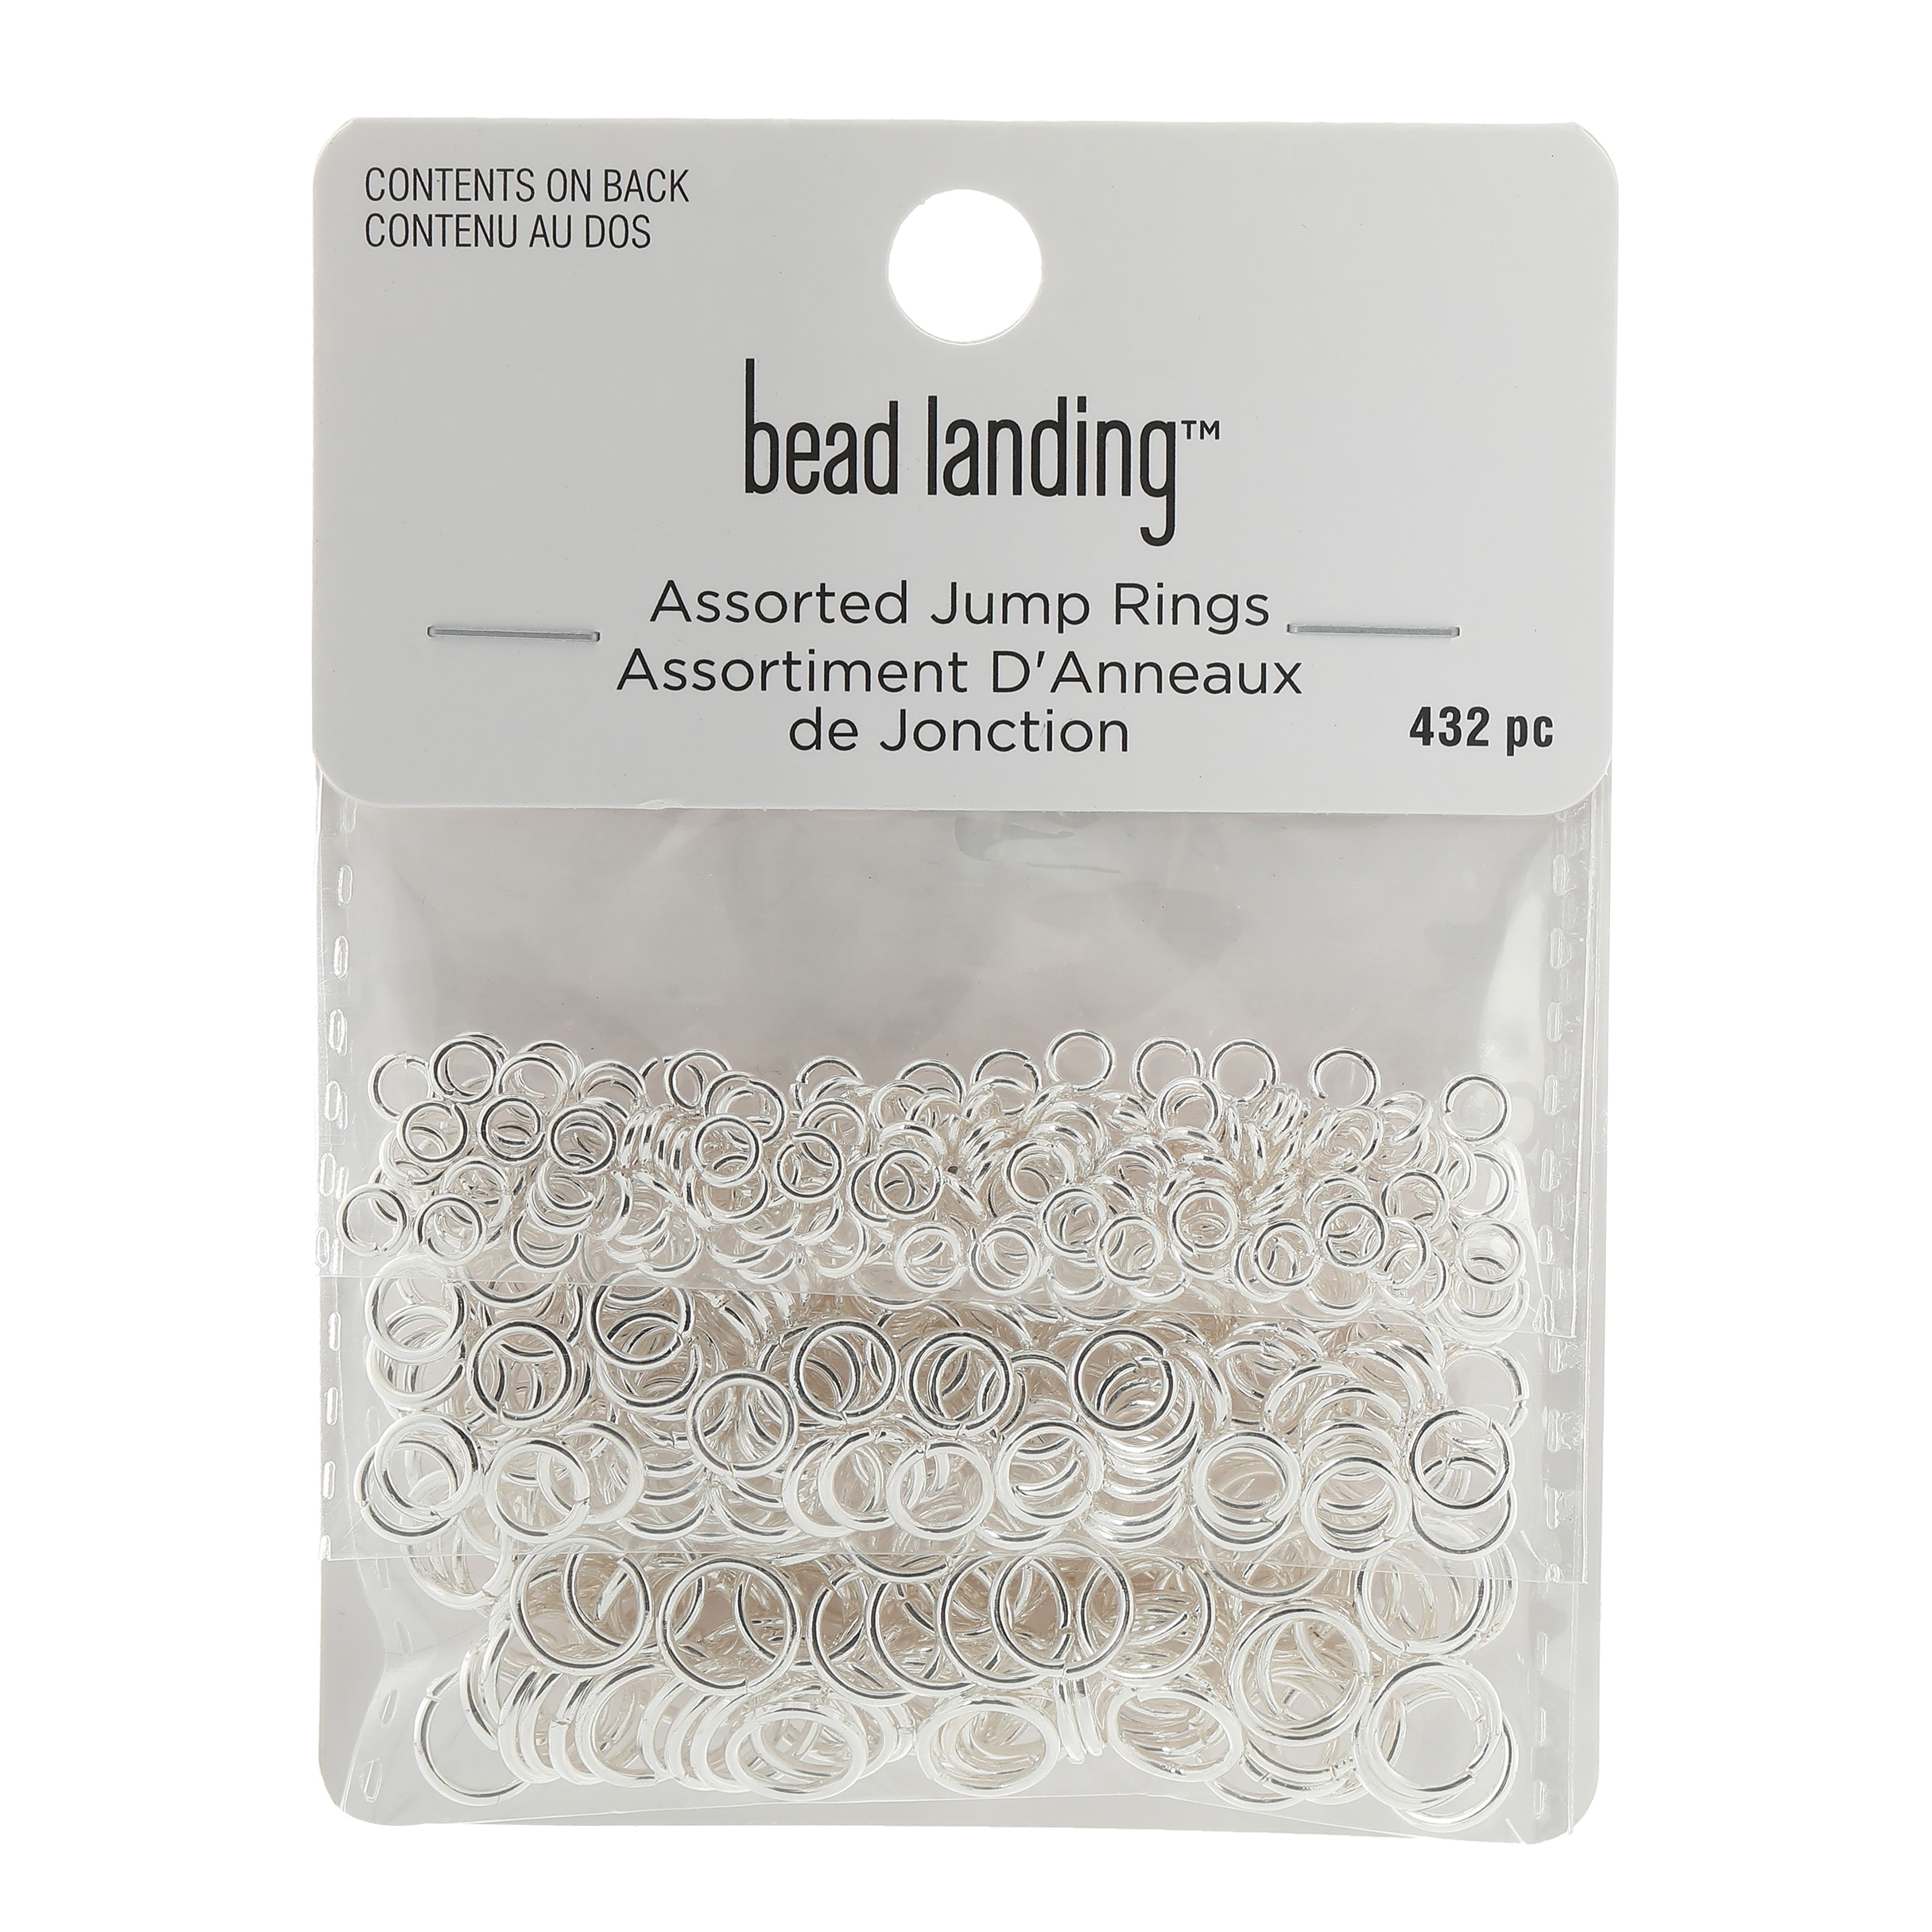  Assorted Jump Rings by Bead Landing™